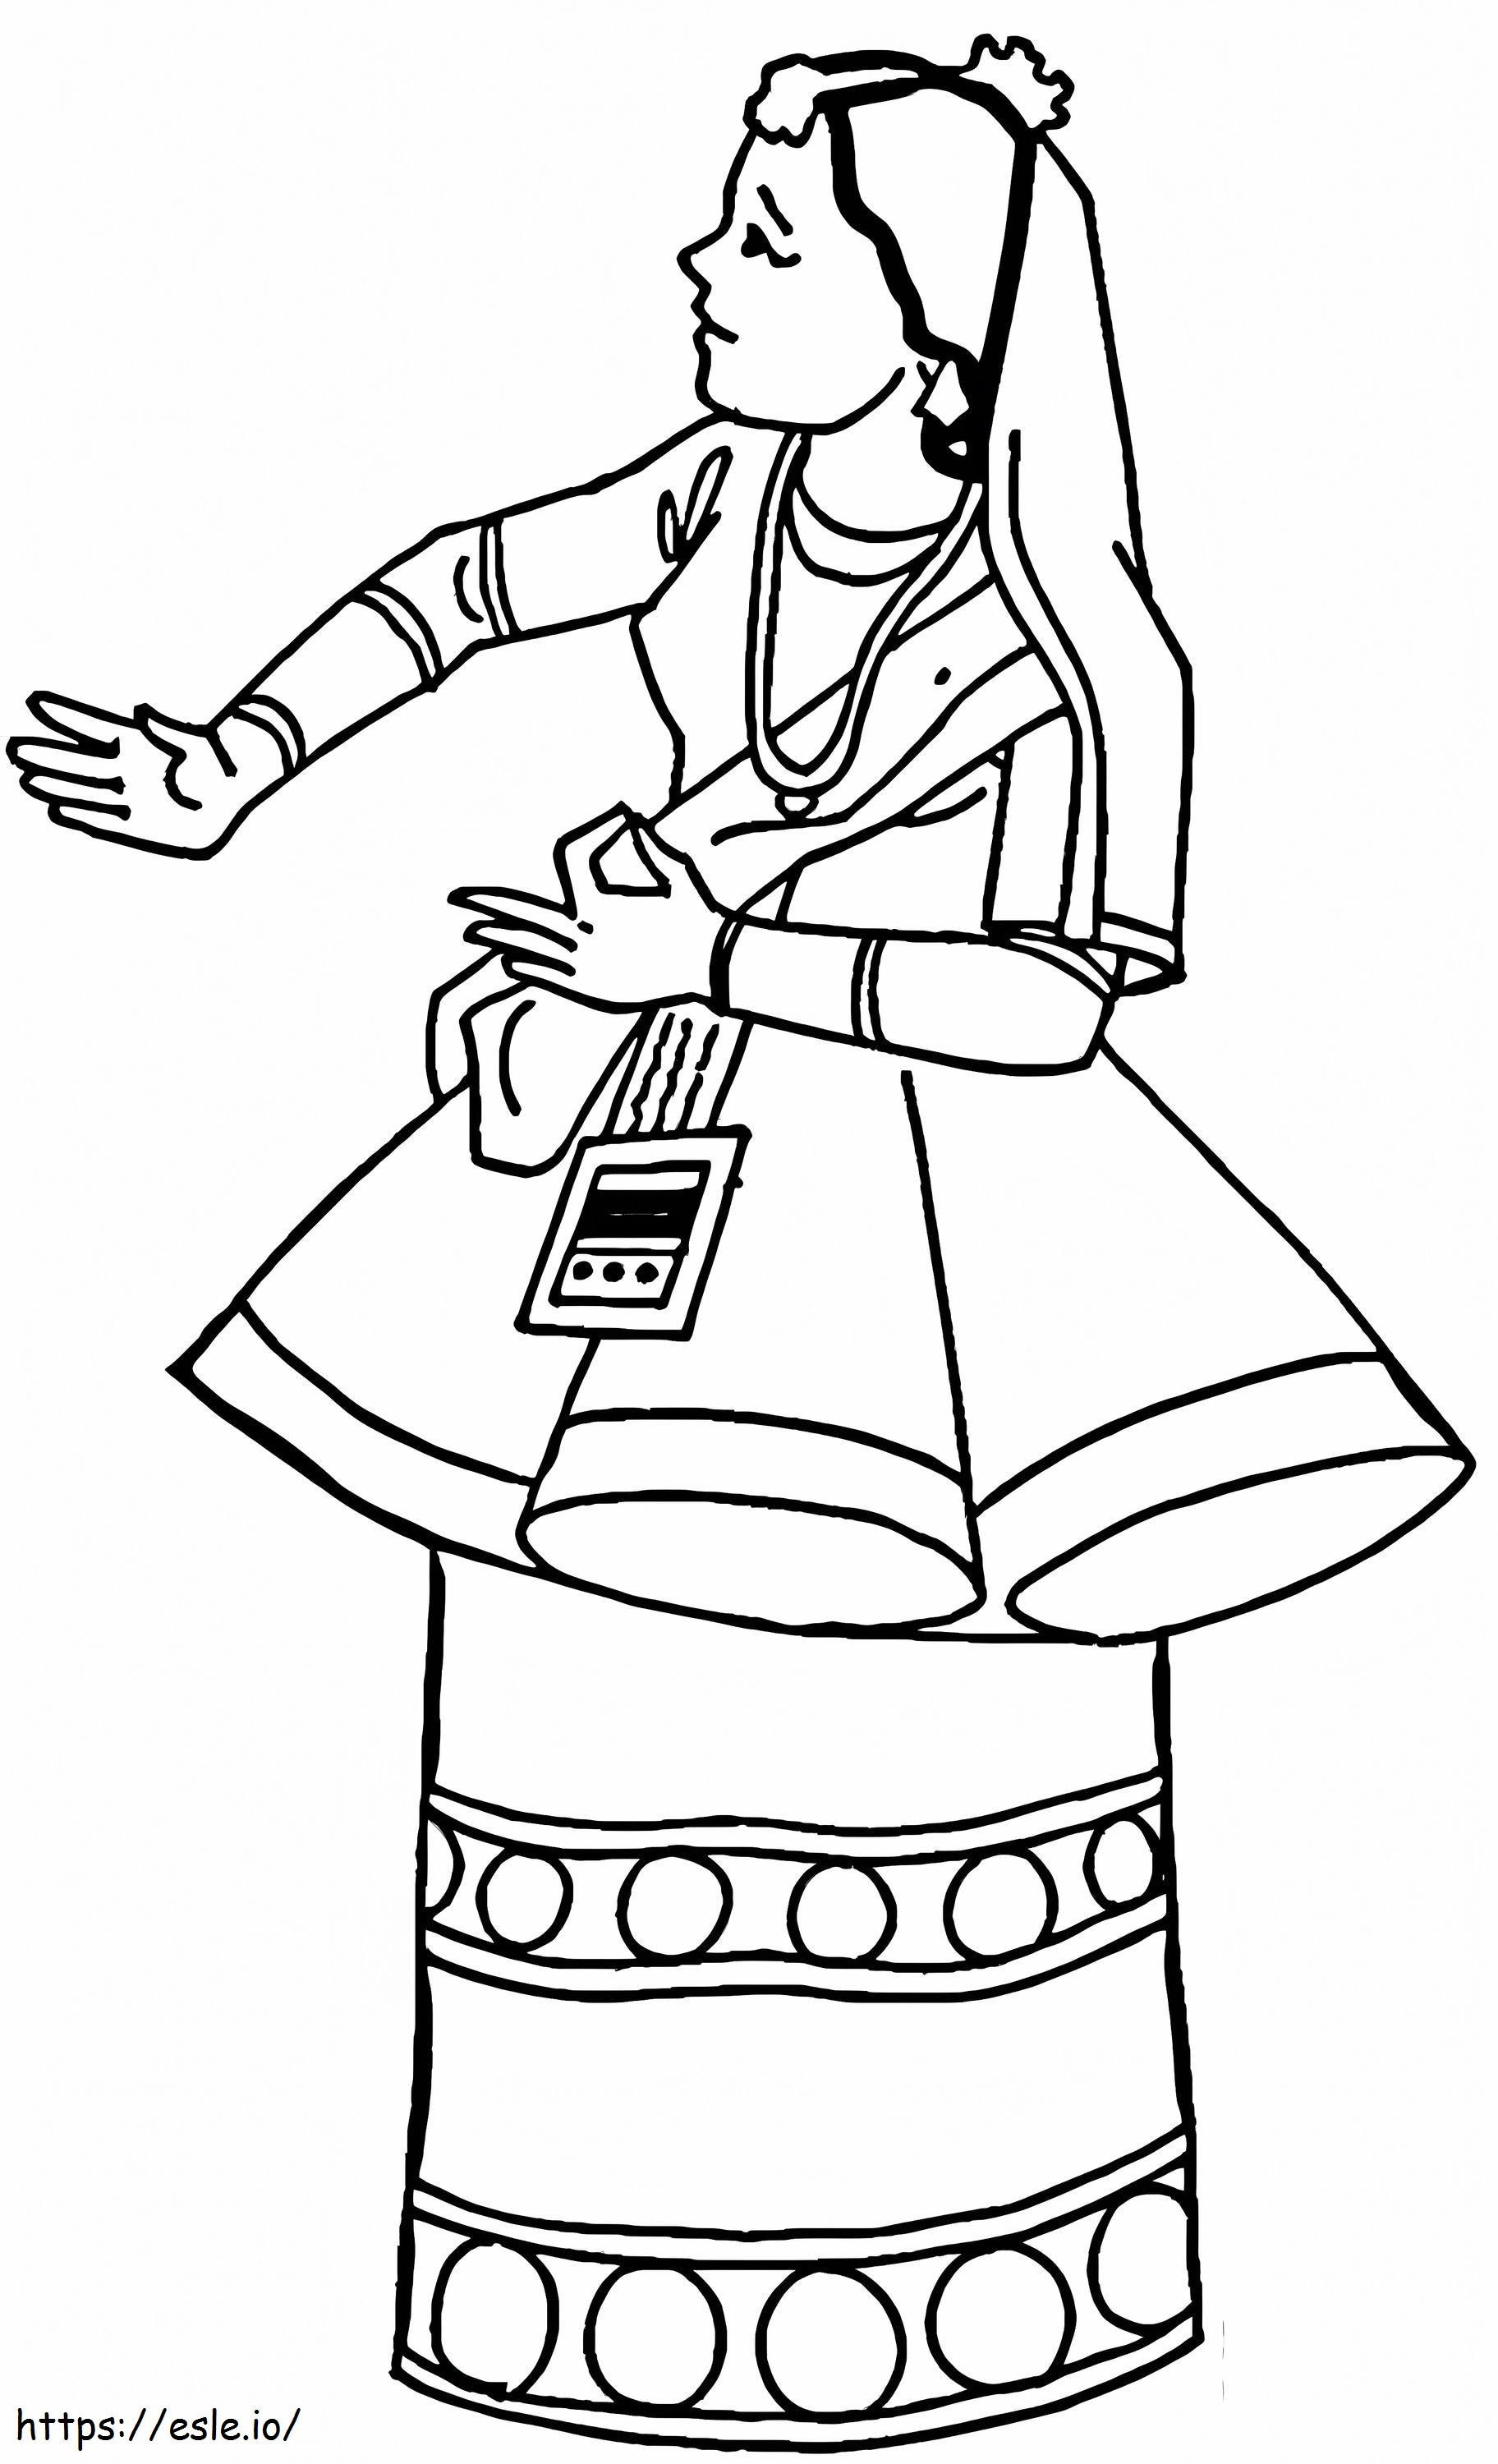 India National Clothing coloring page